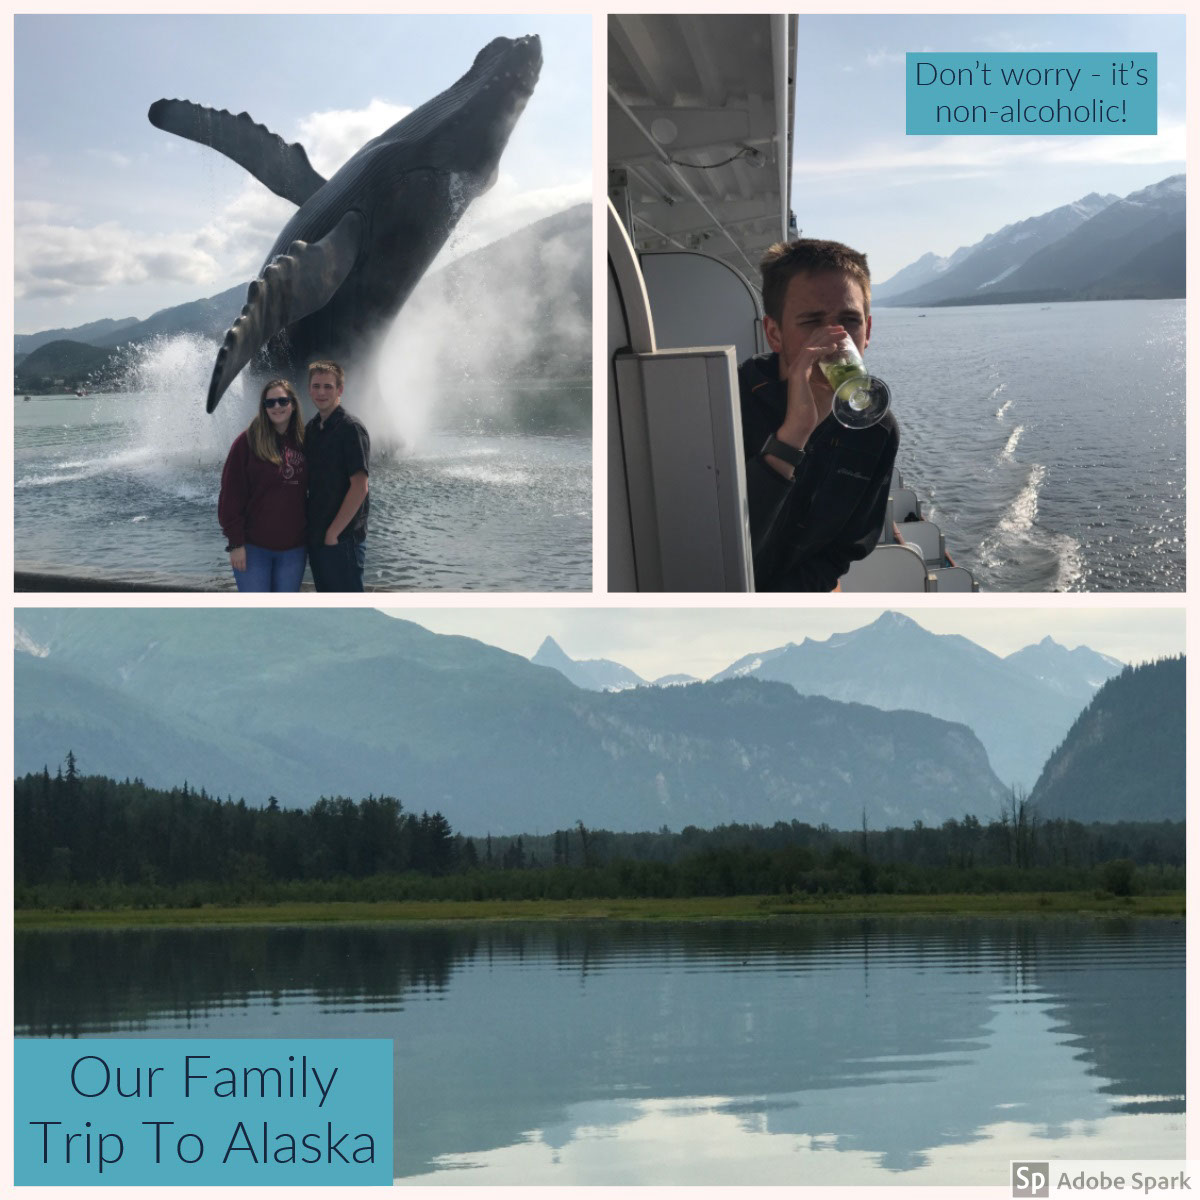 Our Family Trip To Alaska<BR> Our Family Trip To Alaska<BR><P>Don’t worry - it’s non-alcoholic!